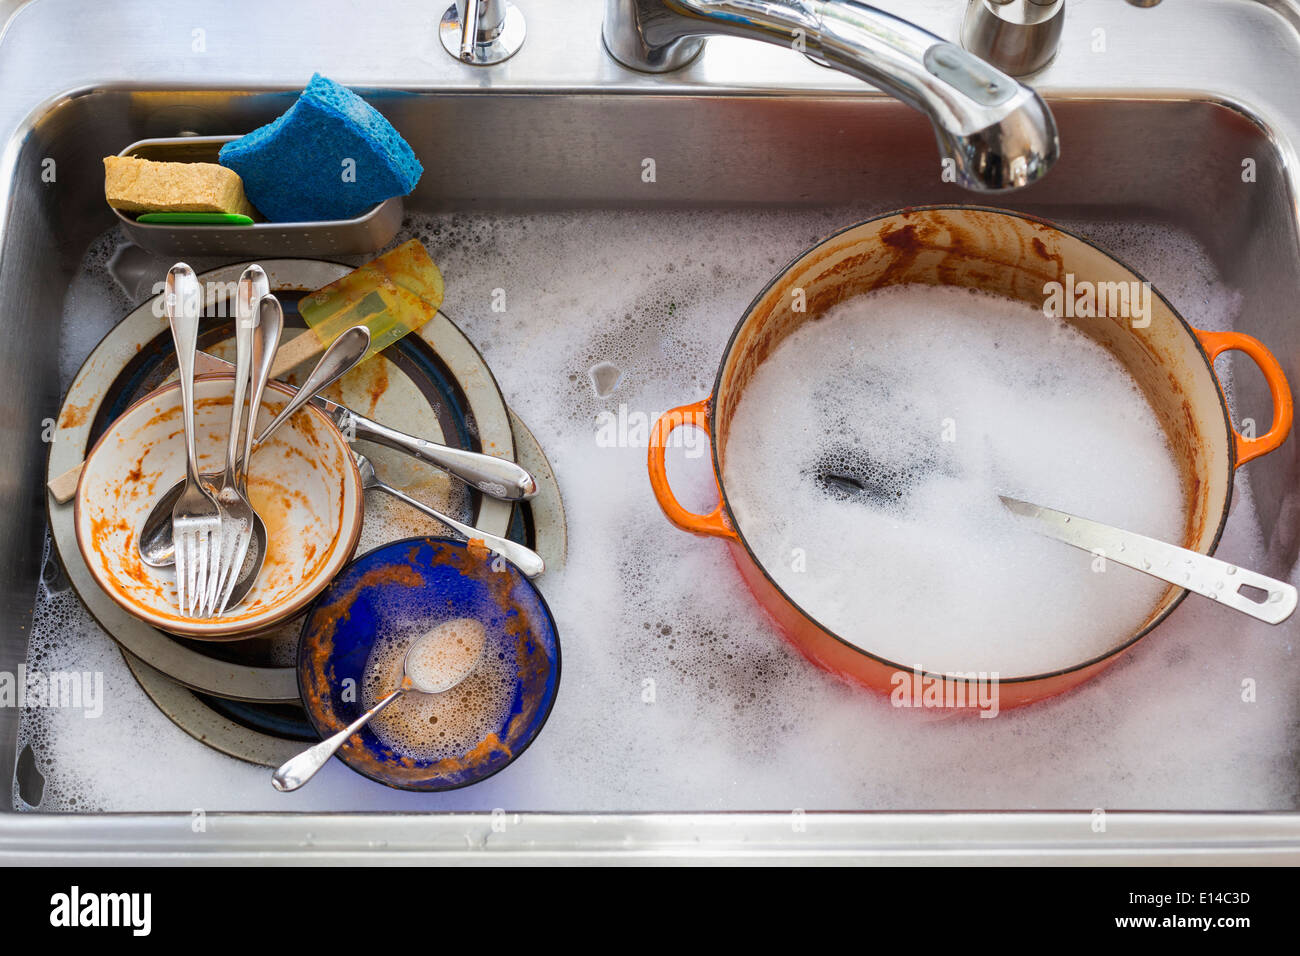 Sink Full Of Dirty Dishes High Resolution Stock Photography and Images ...